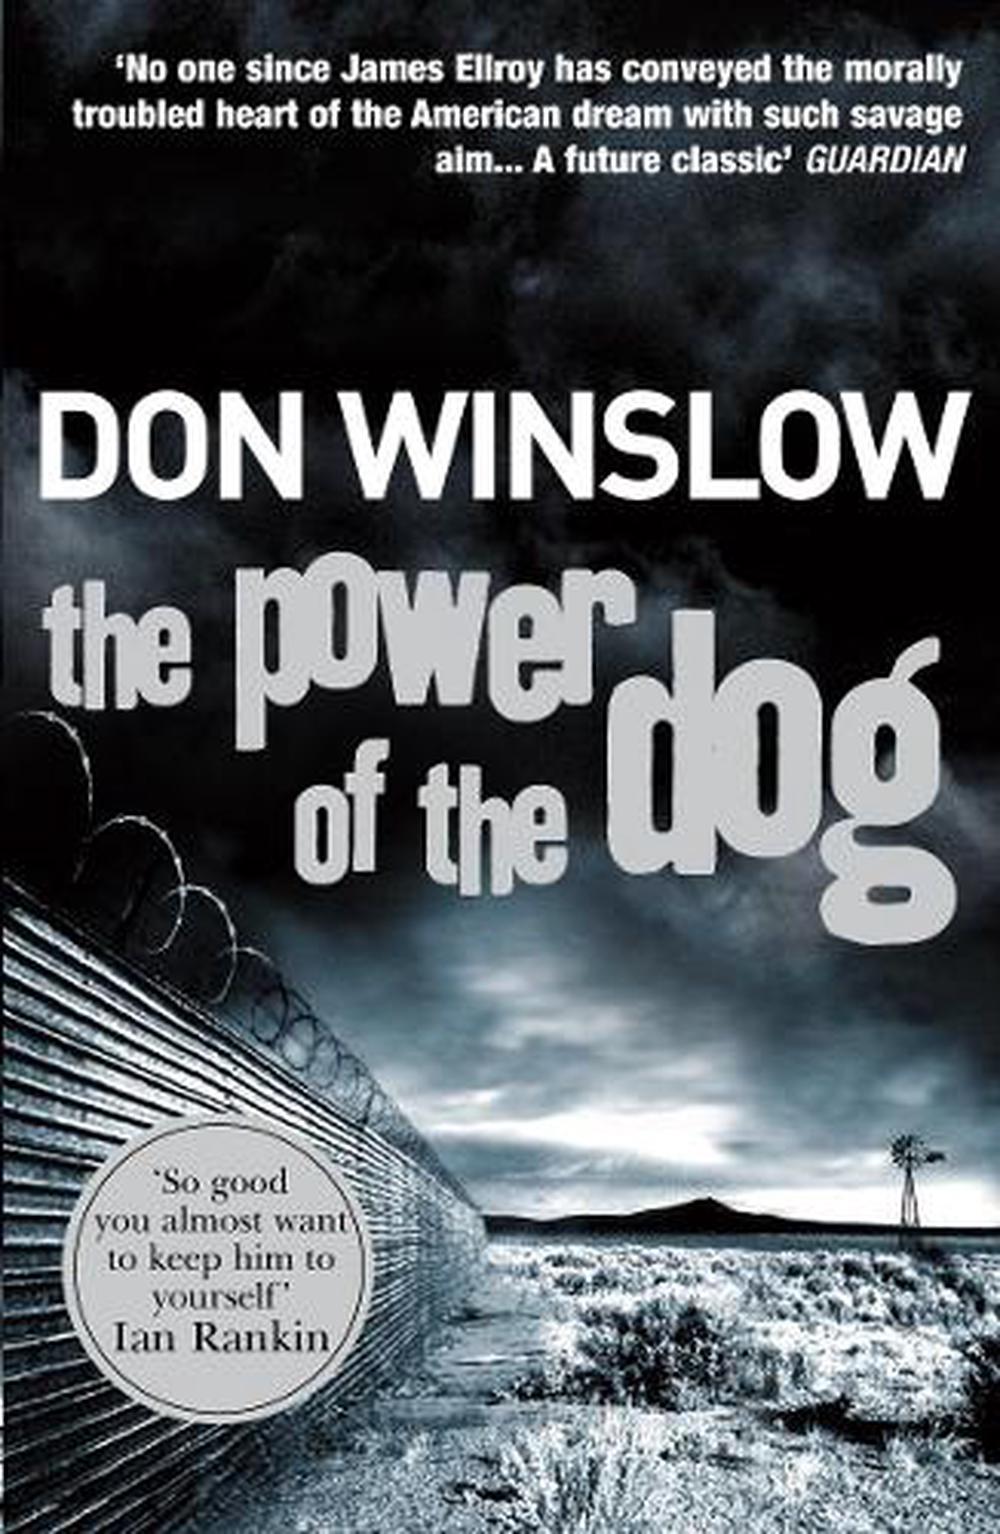 the power of the dog book winslow